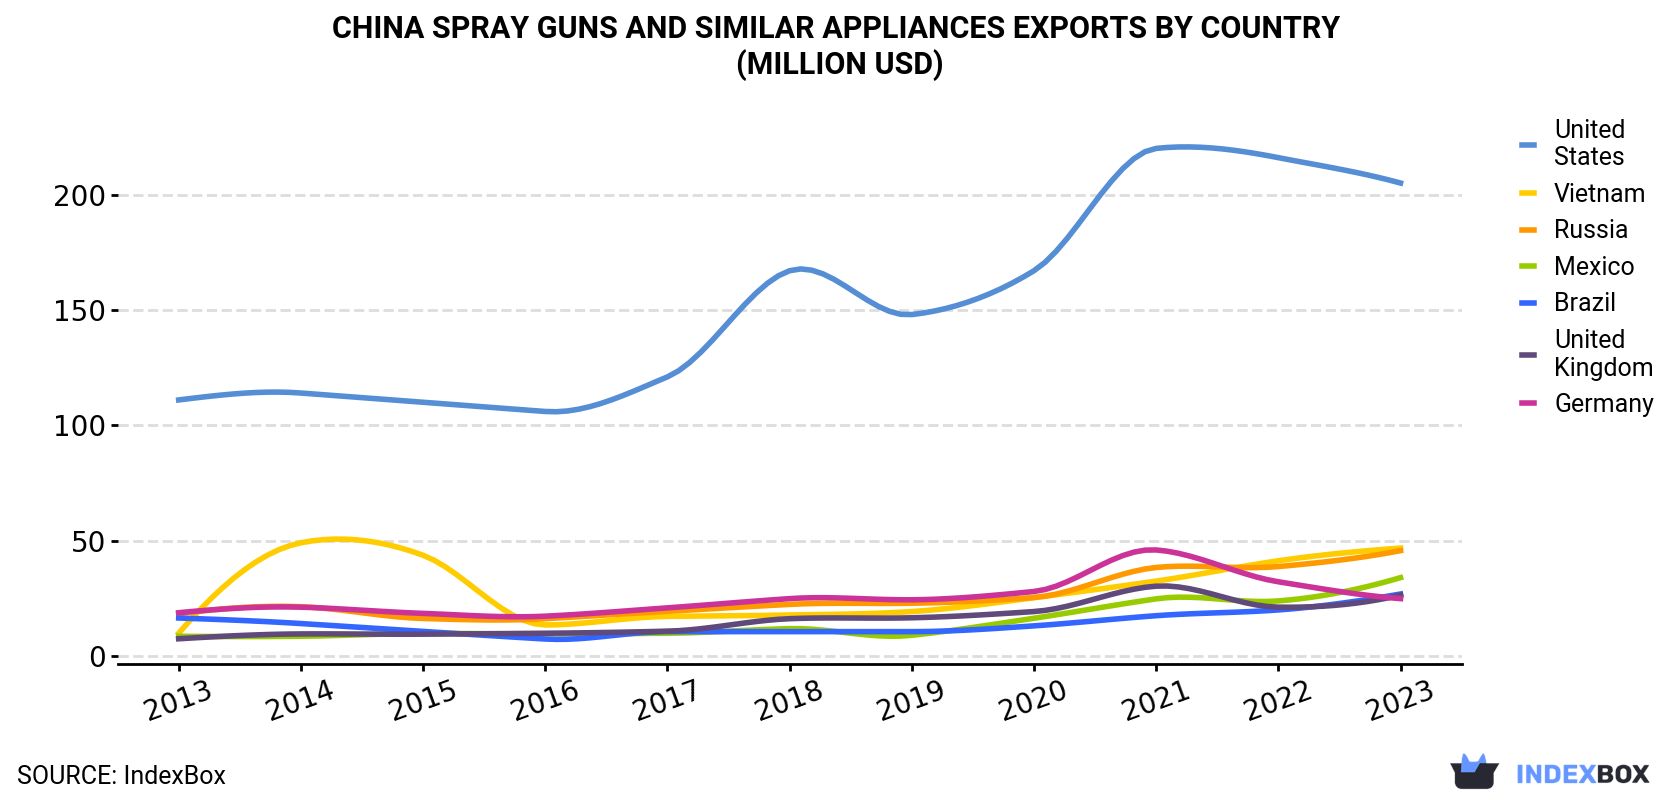 China Spray Guns And Similar Appliances Exports By Country (Million USD)